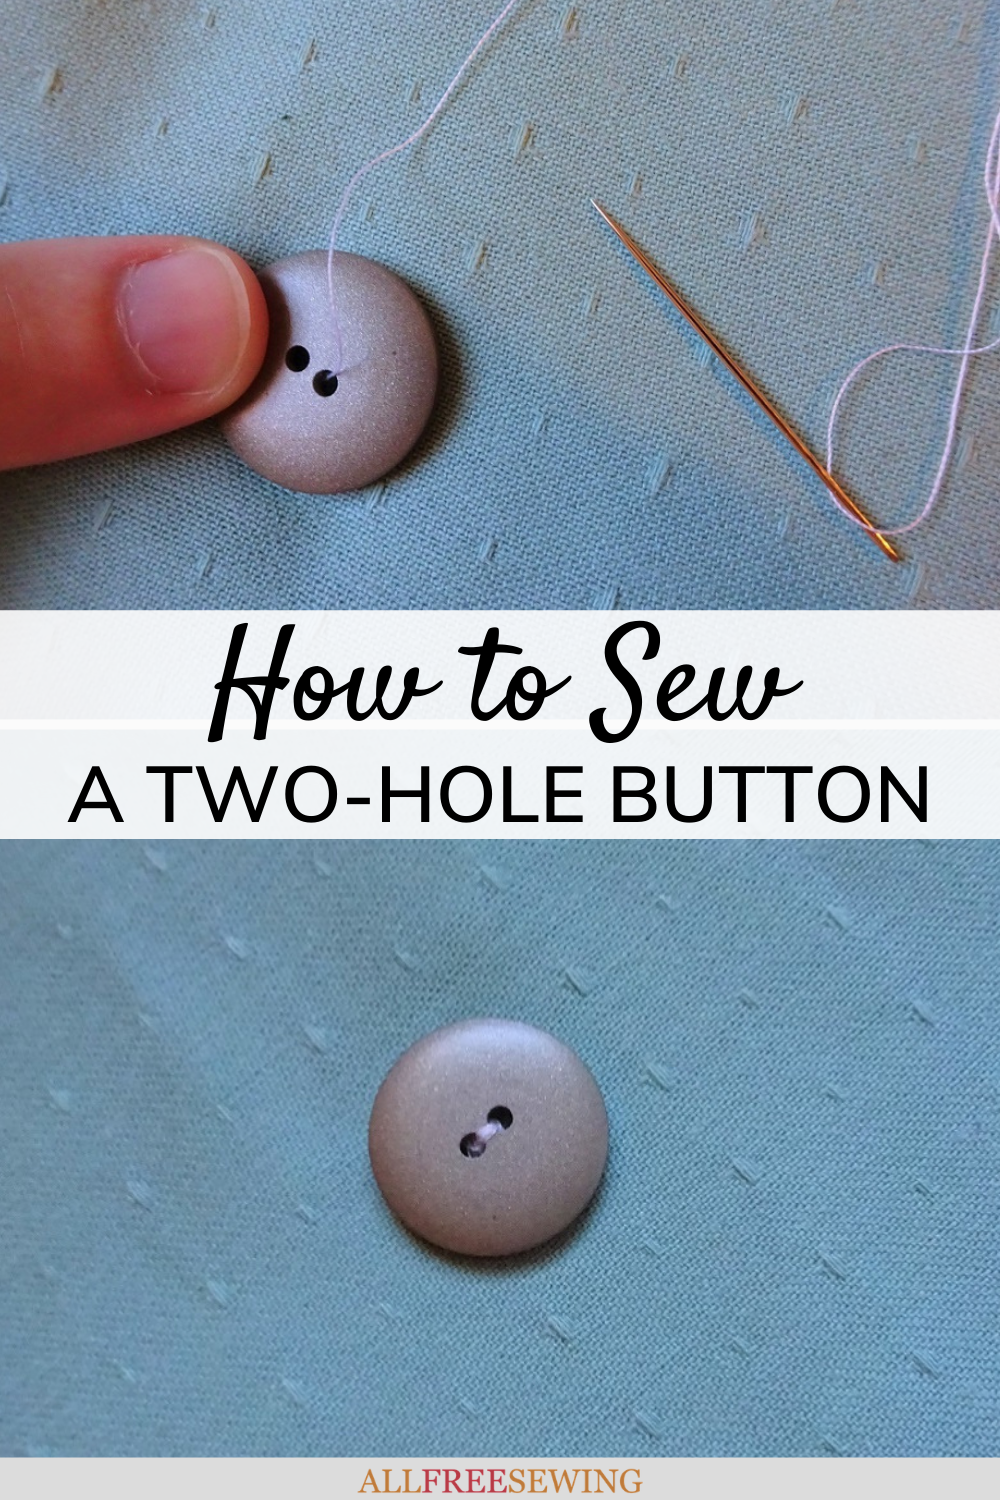 Blue Sewing Button With 4 Hole PNG Image for Free Download